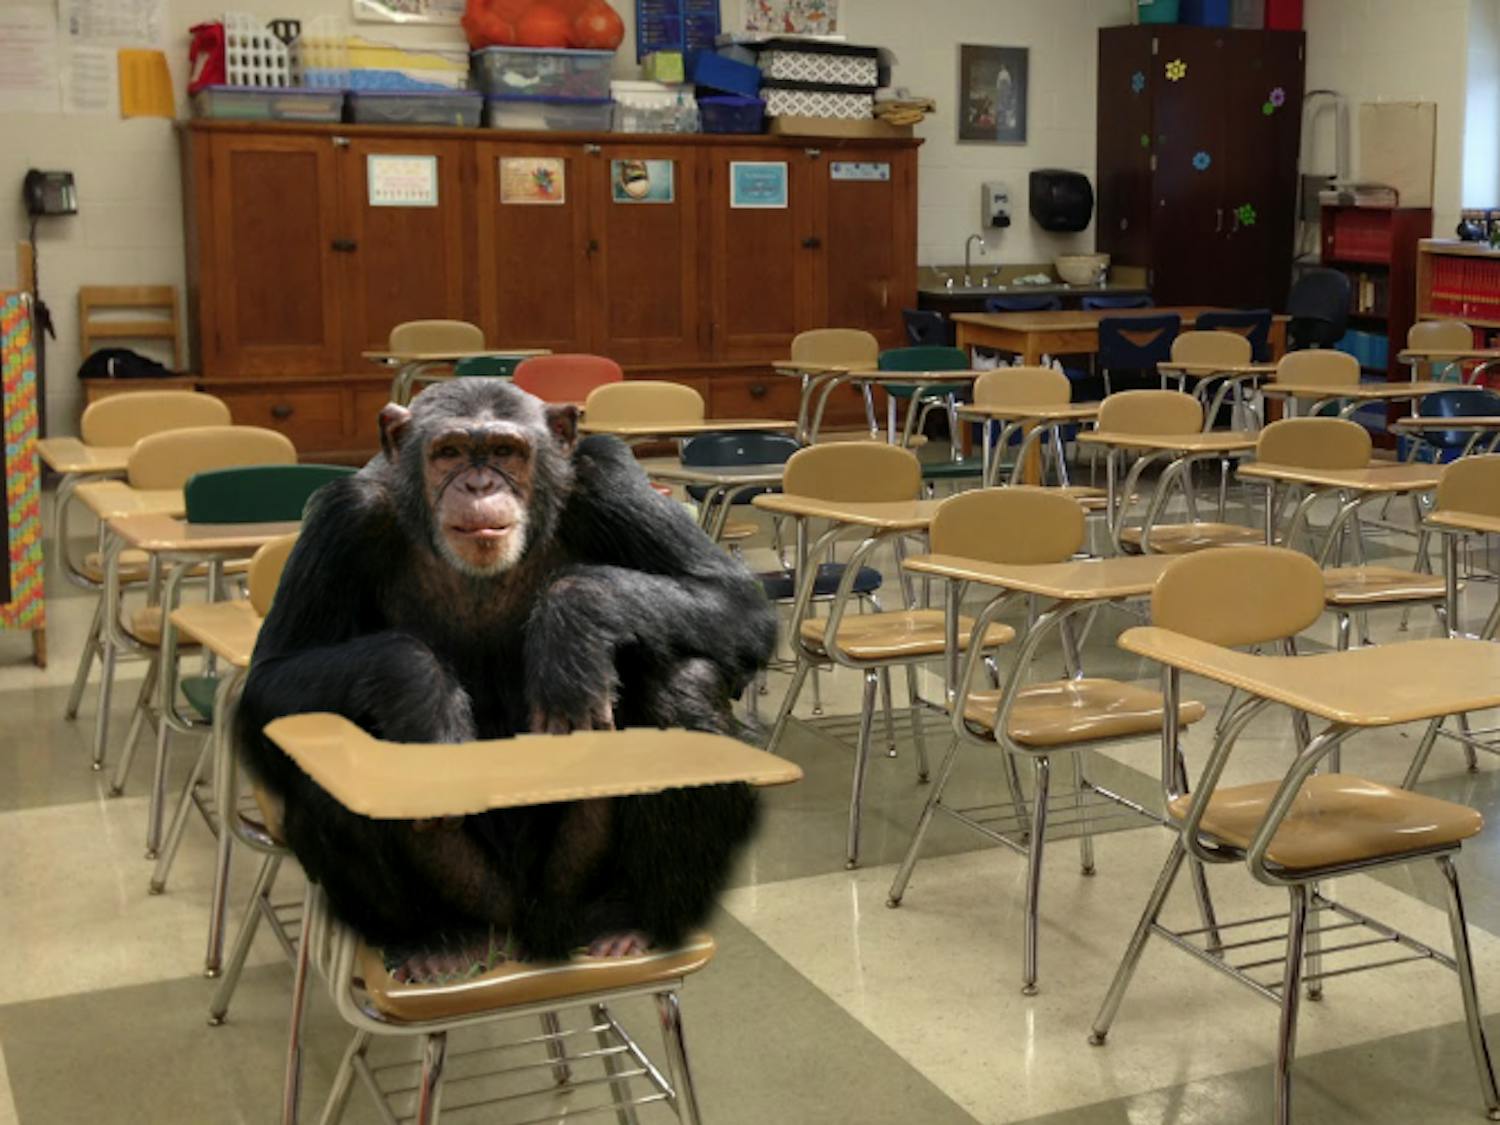 Former professor of Zoology, Banjo the chimpanzee, is seen here in the classroom where he used to instruct. He is currently unemployed.